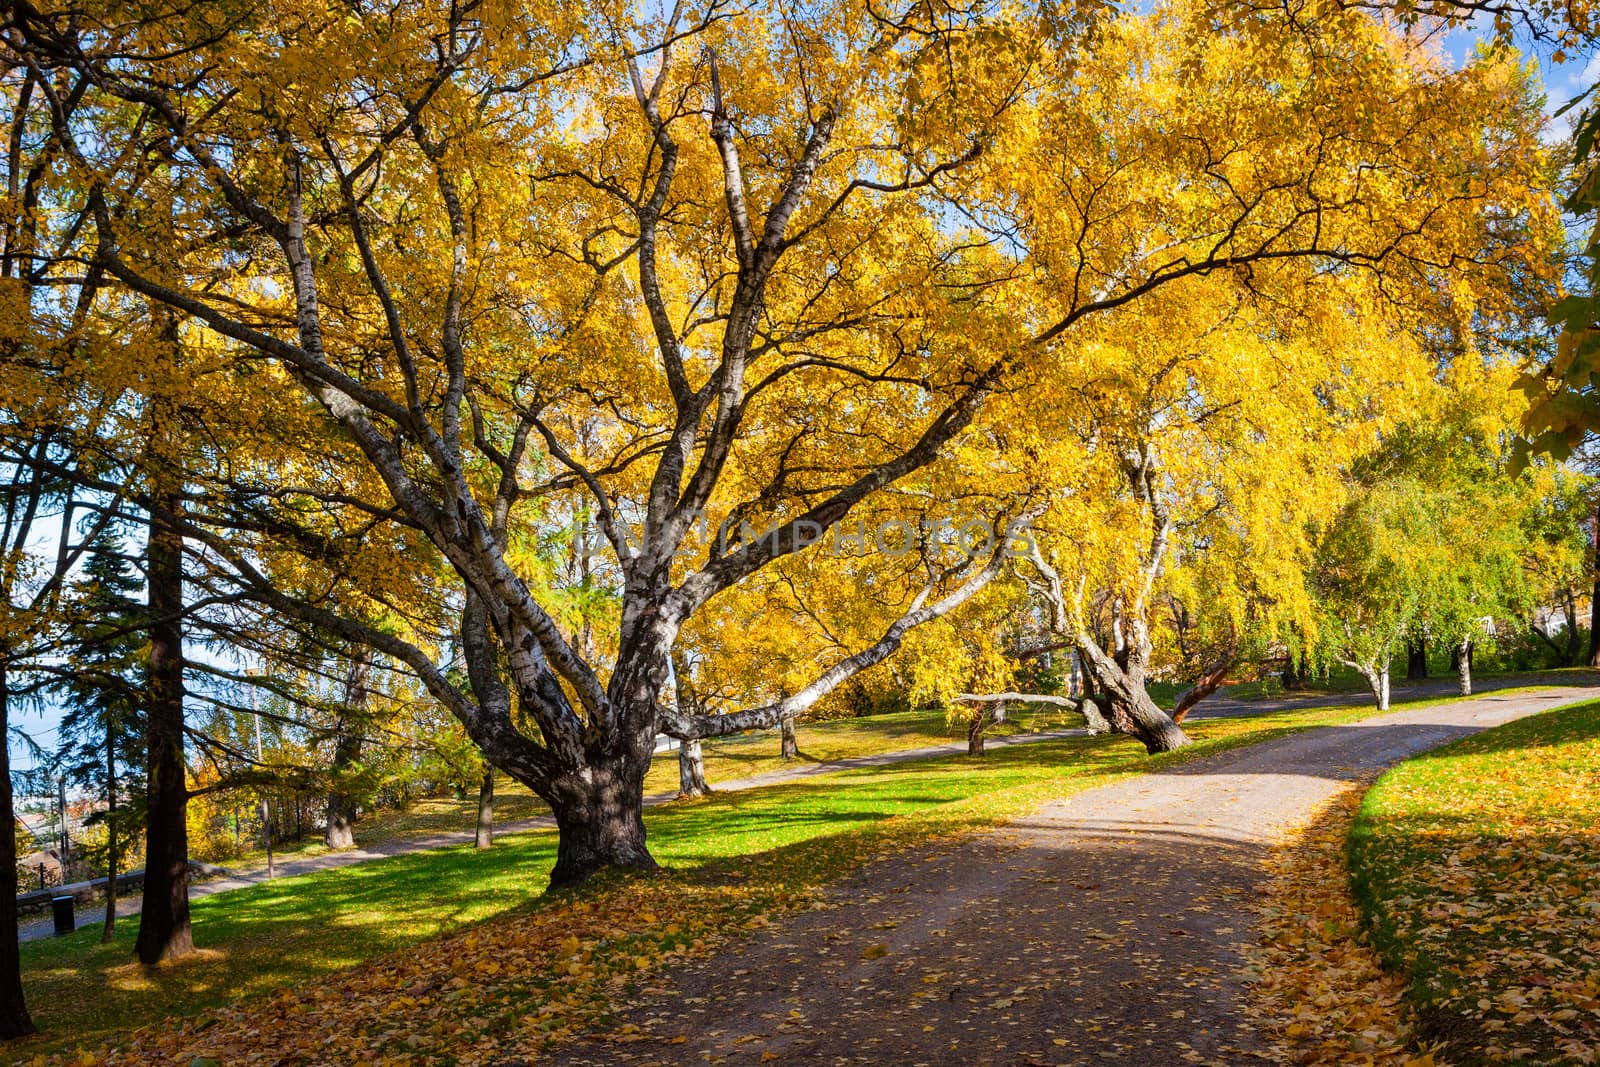 Peaceful park with autumn colors in trees